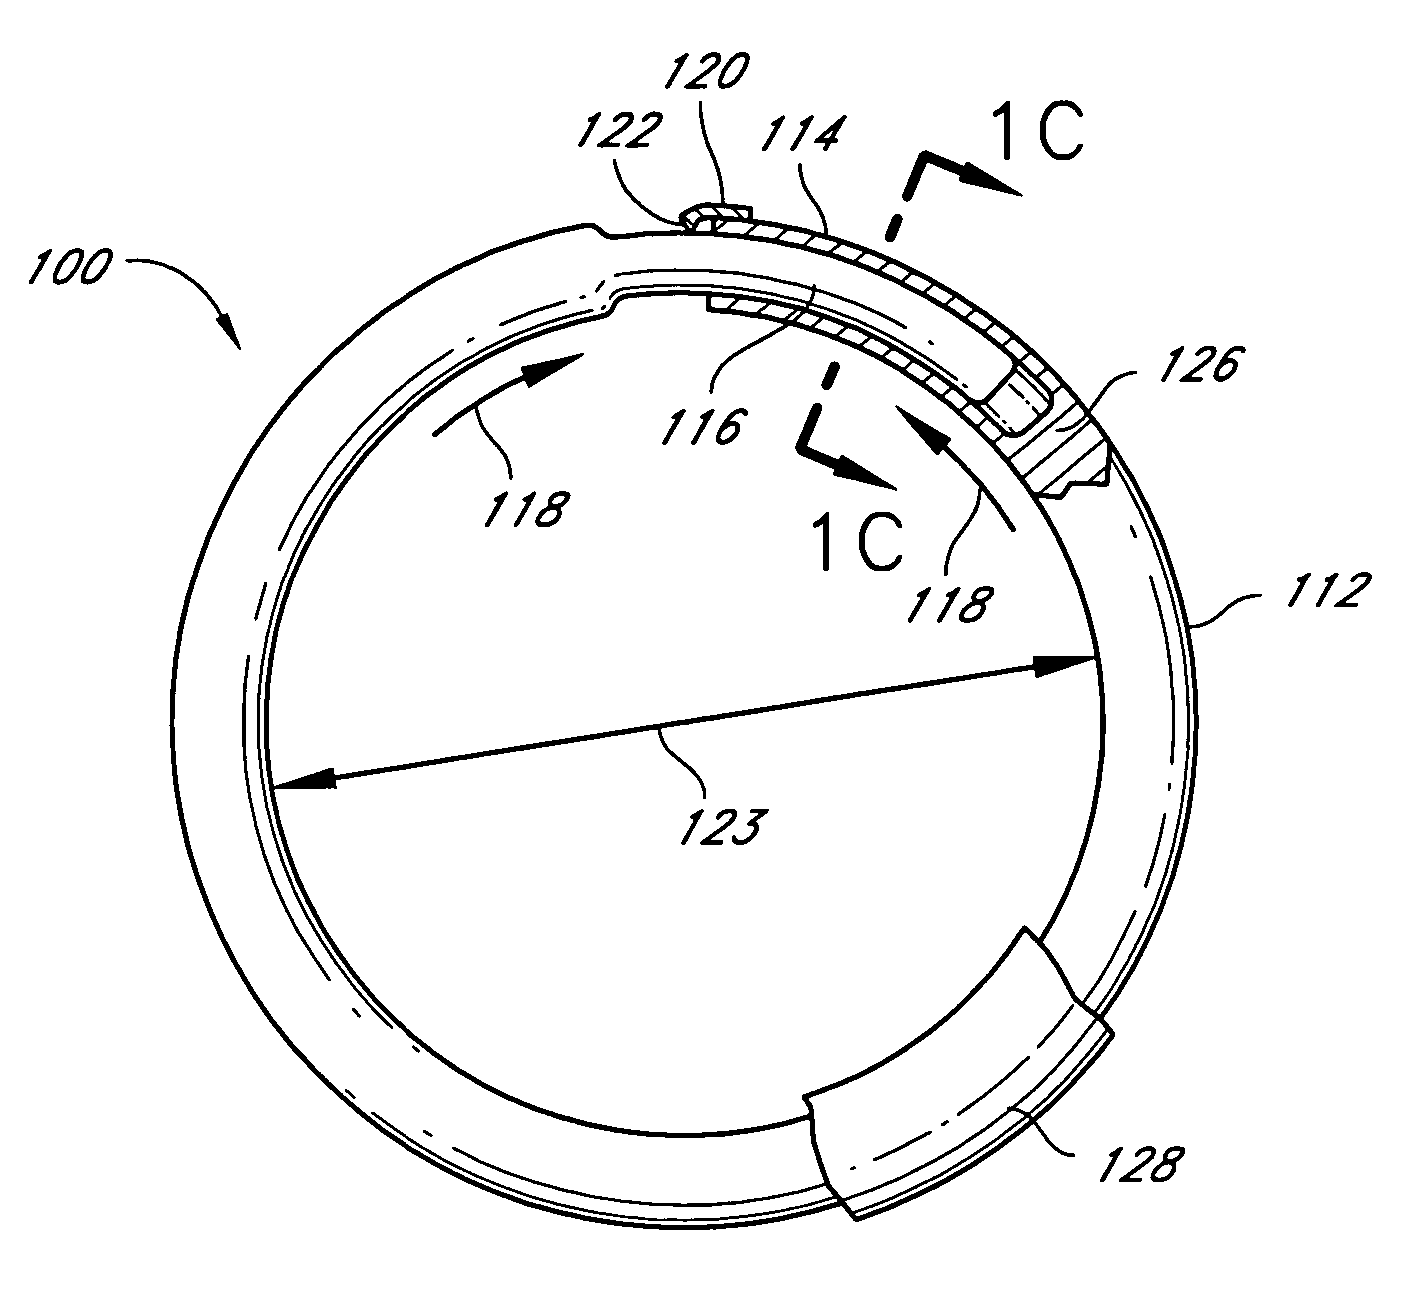 Cardiac valve implant with energy absorbing material